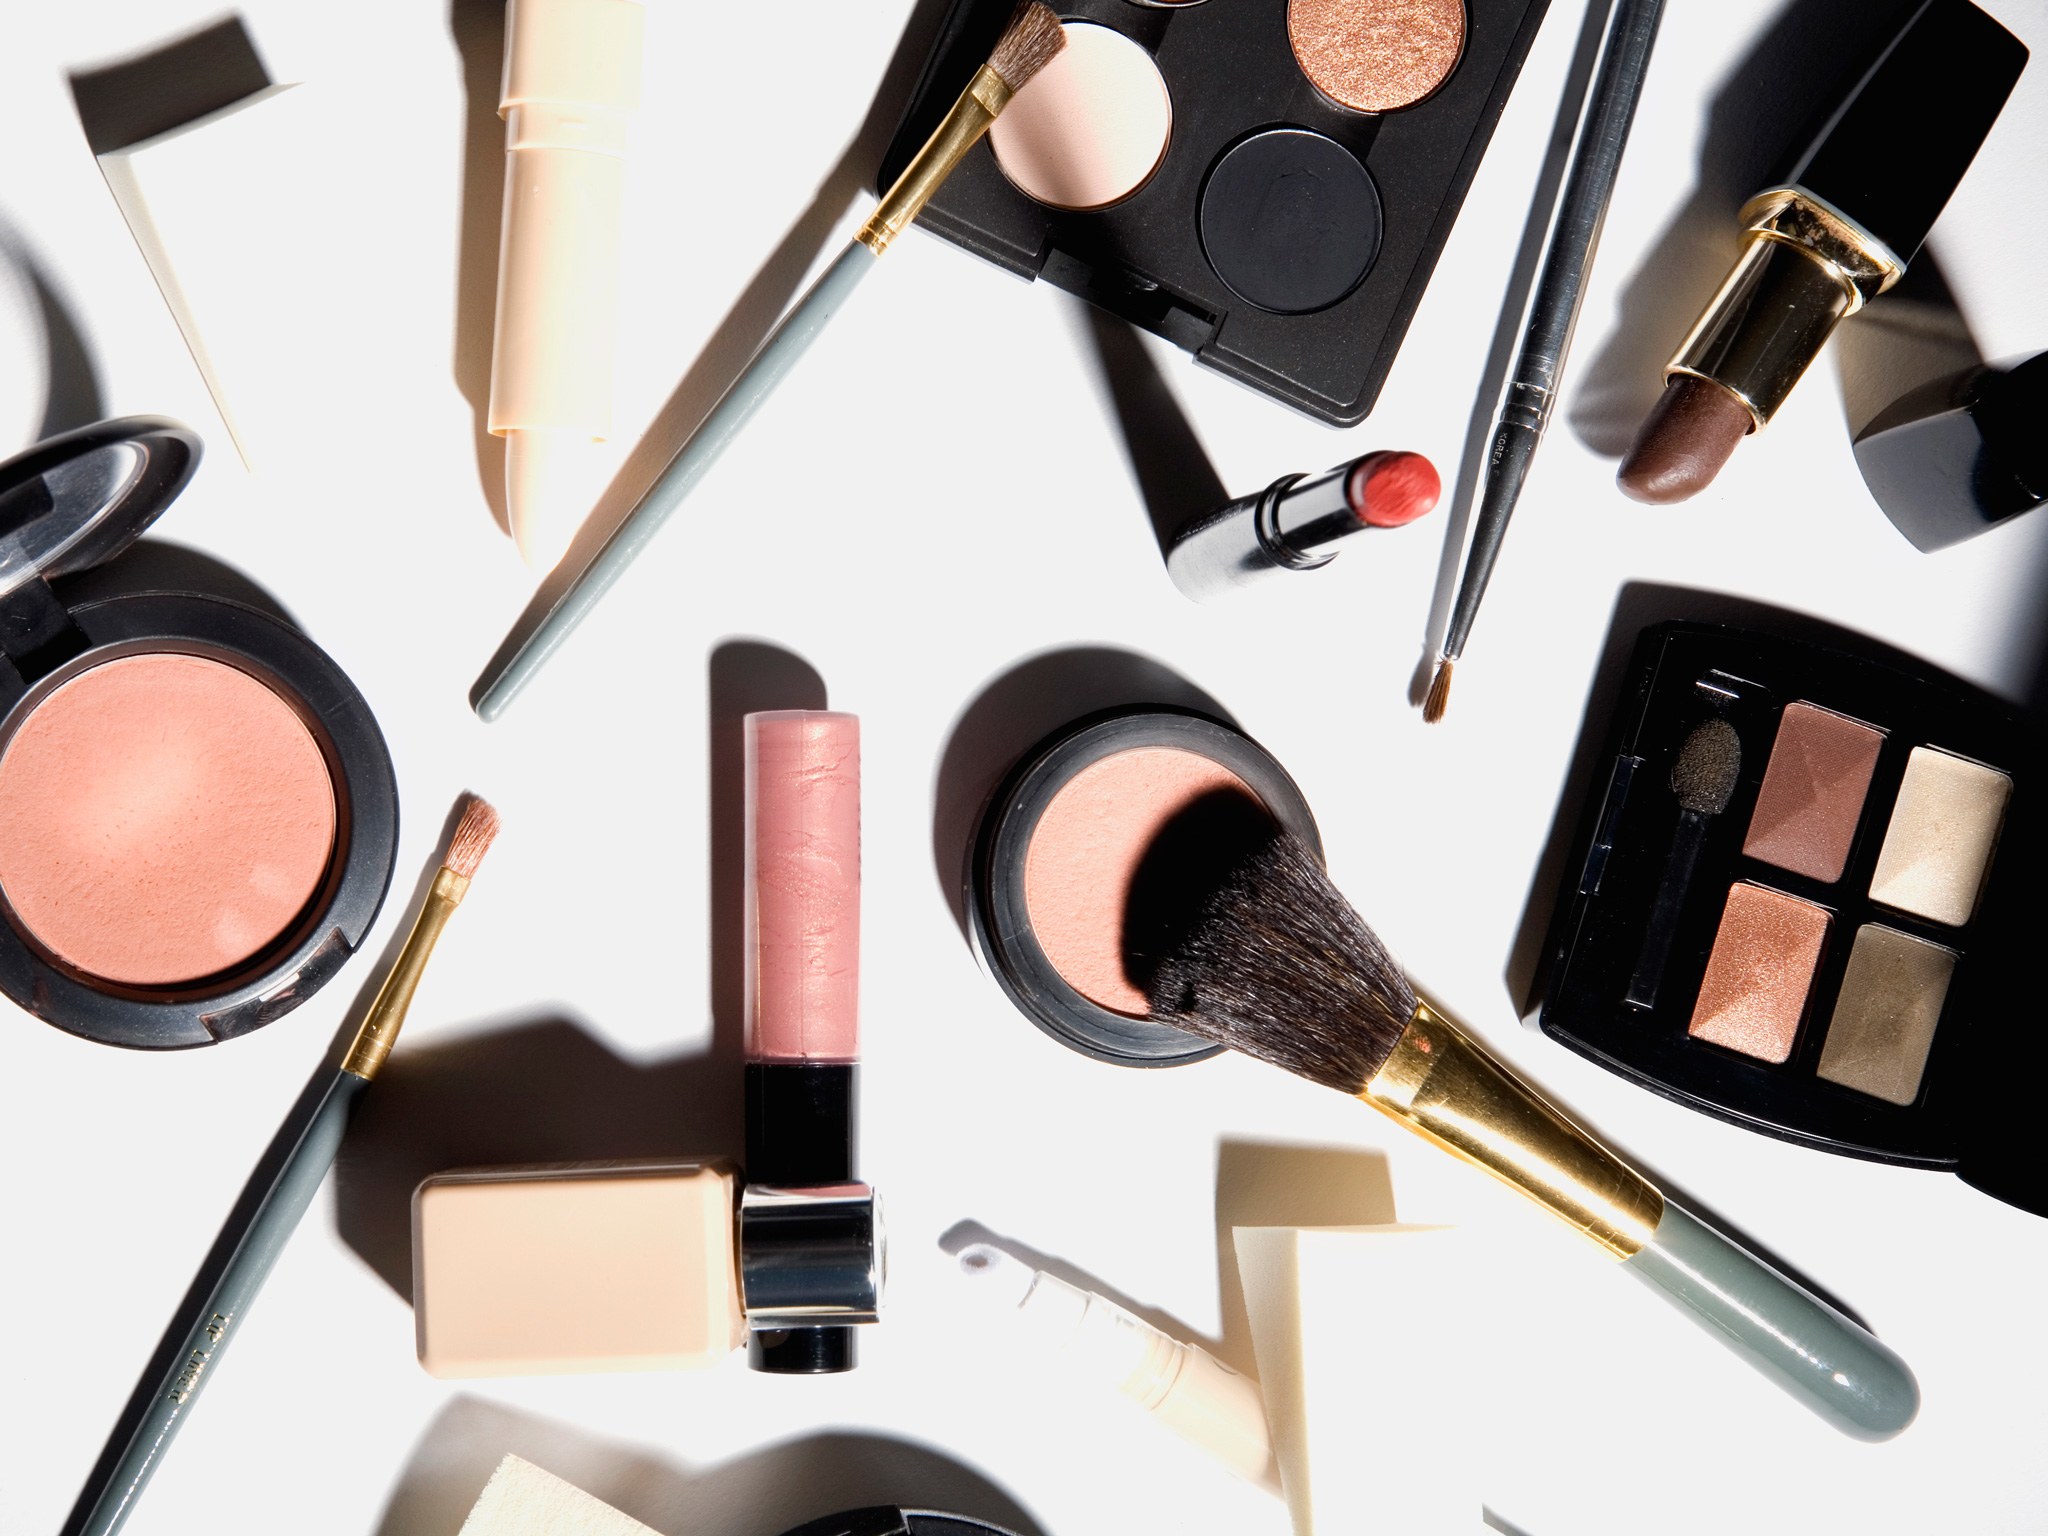 Top Tips to Save on Amazing Make-Up Looks | BeautyStat.com